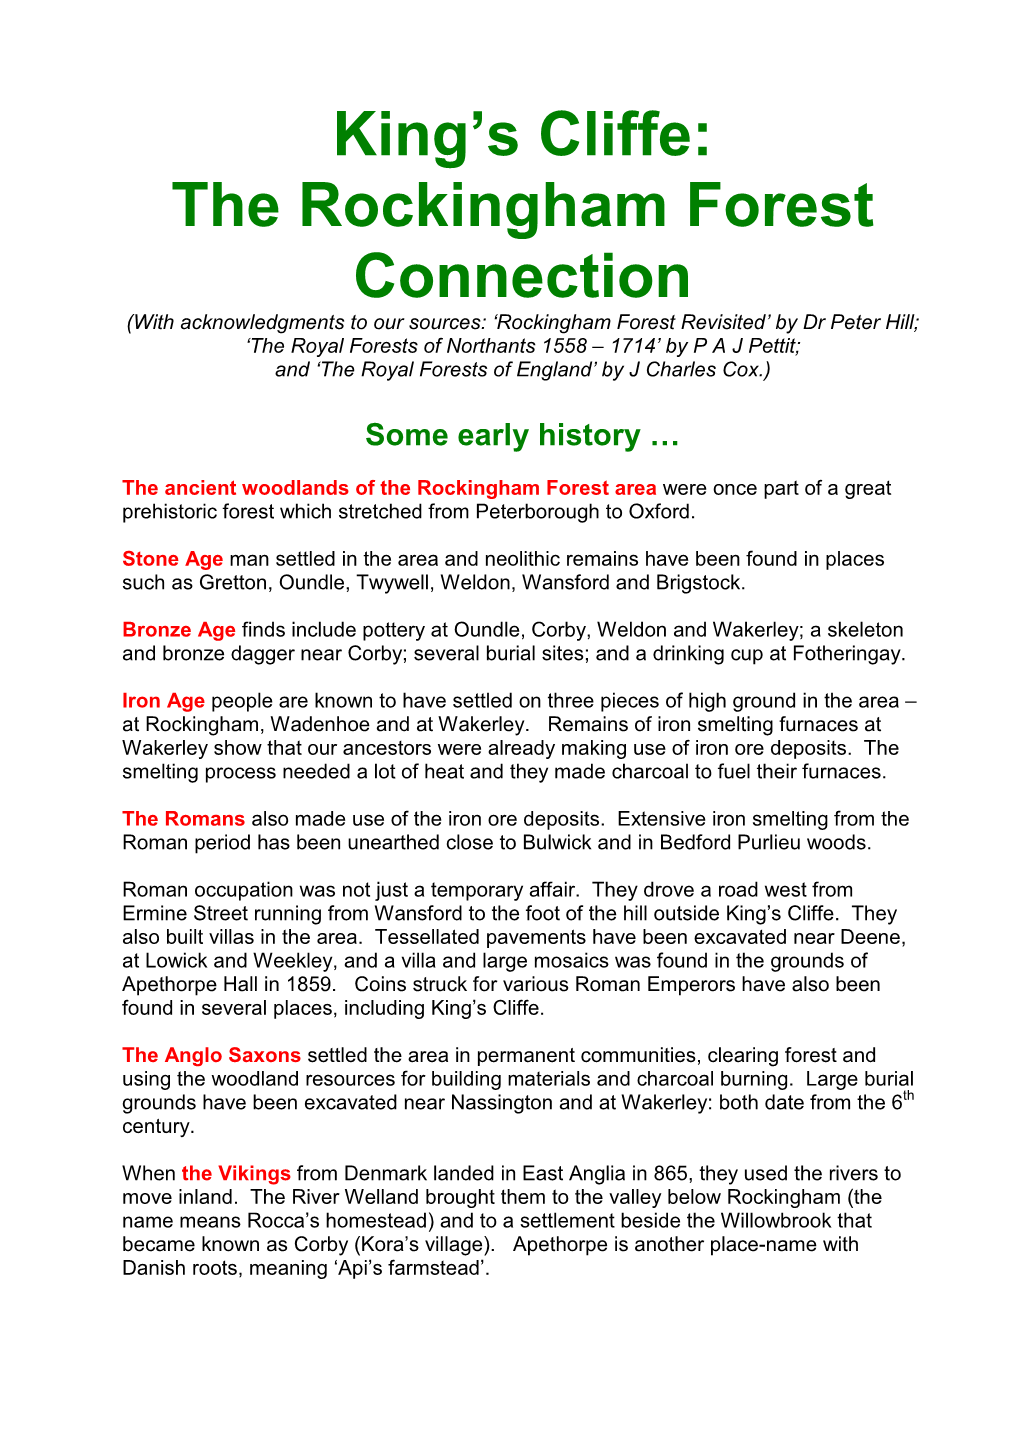 The Rockingham Forest Connection